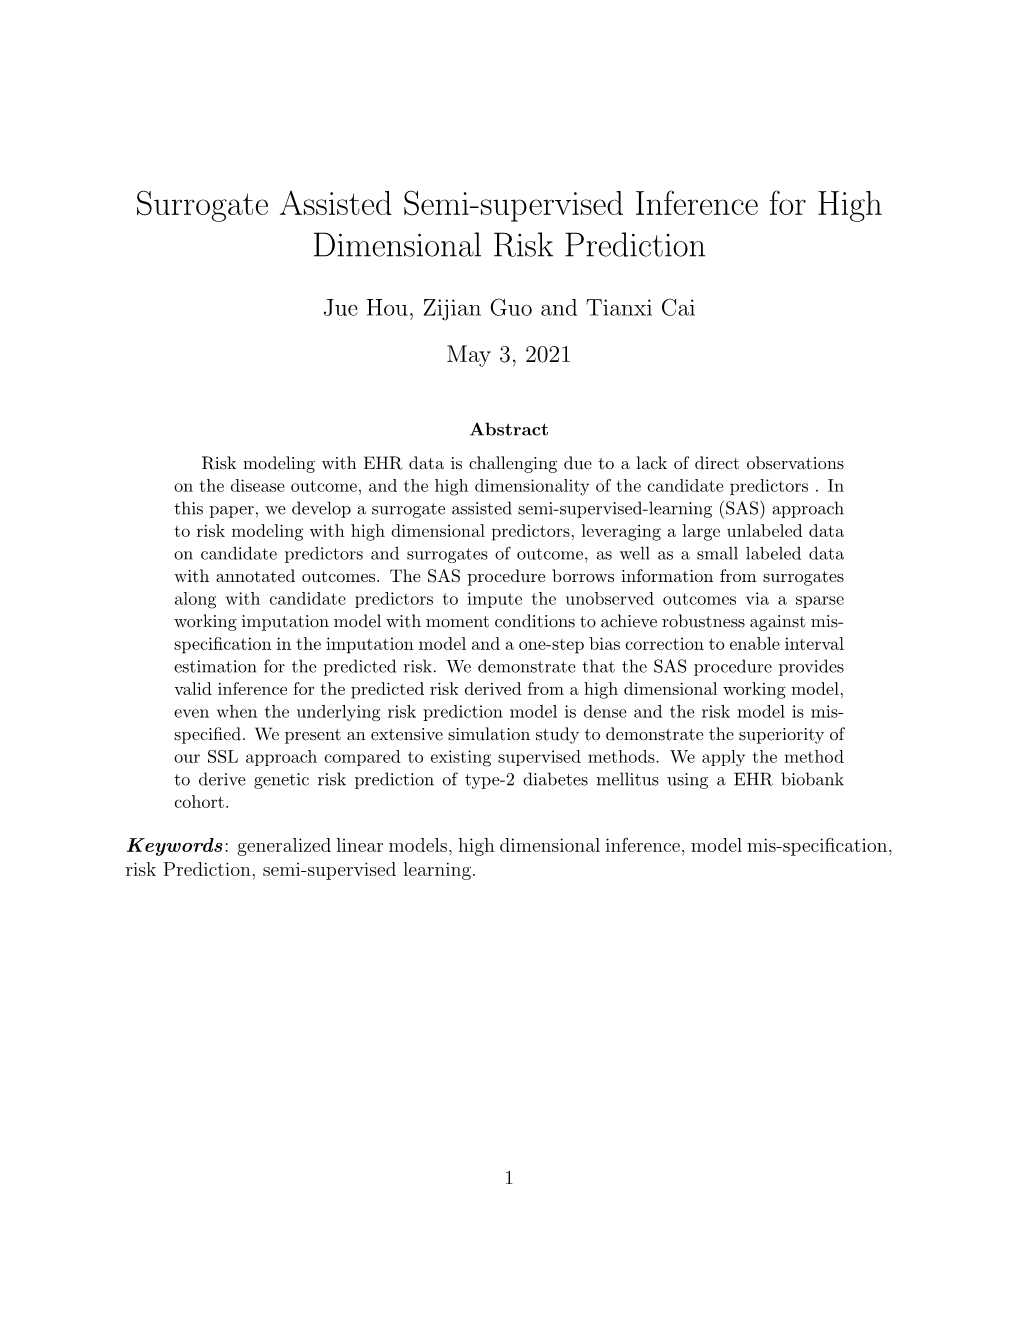 Surrogate Assisted Semi-Supervised Inference for High Dimensional Risk Prediction